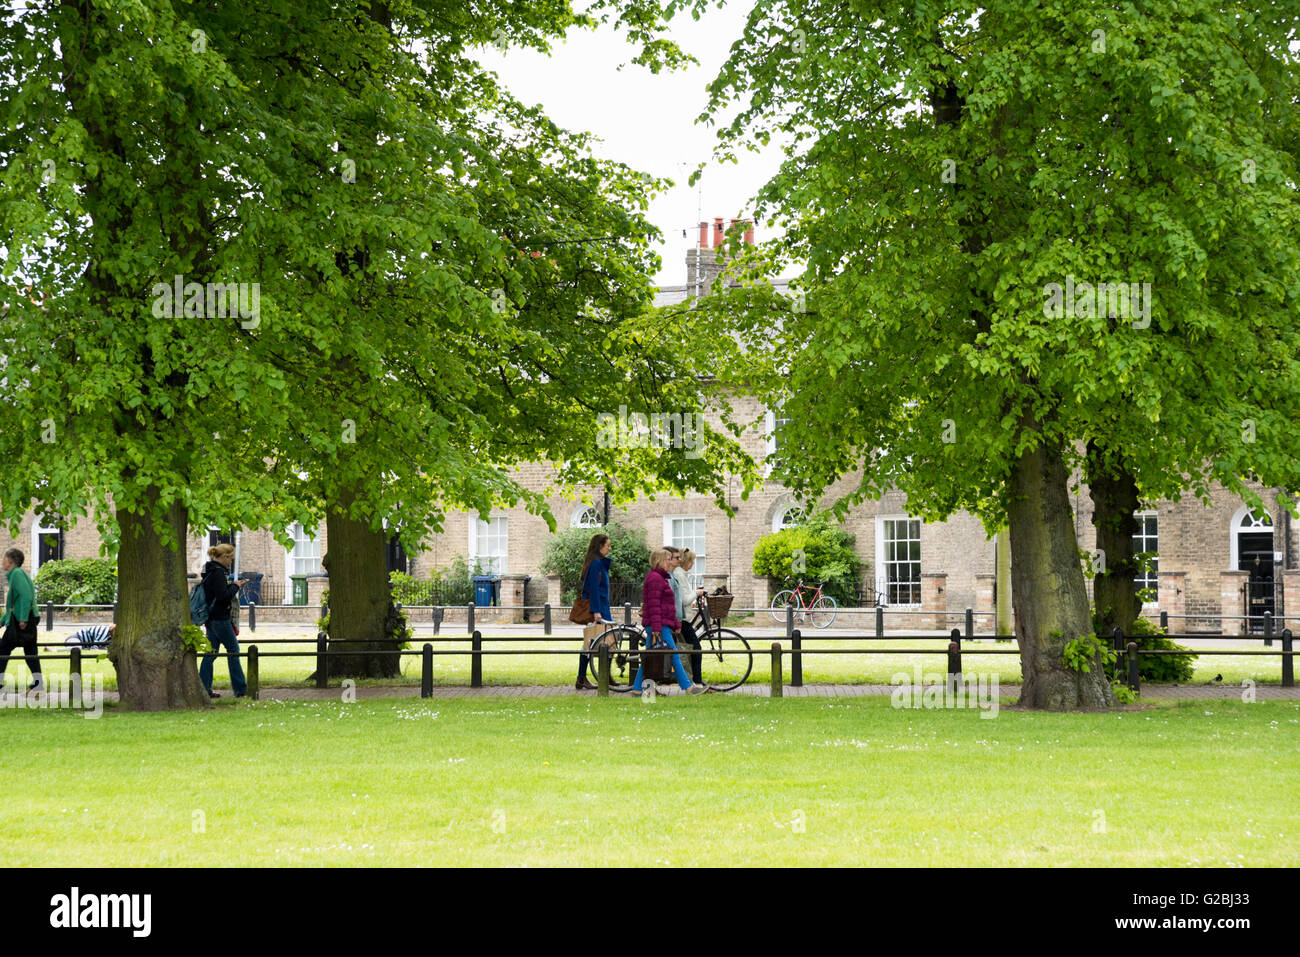 People walking on a path between trees in New Square Cambridge UK in summer Stock Photo